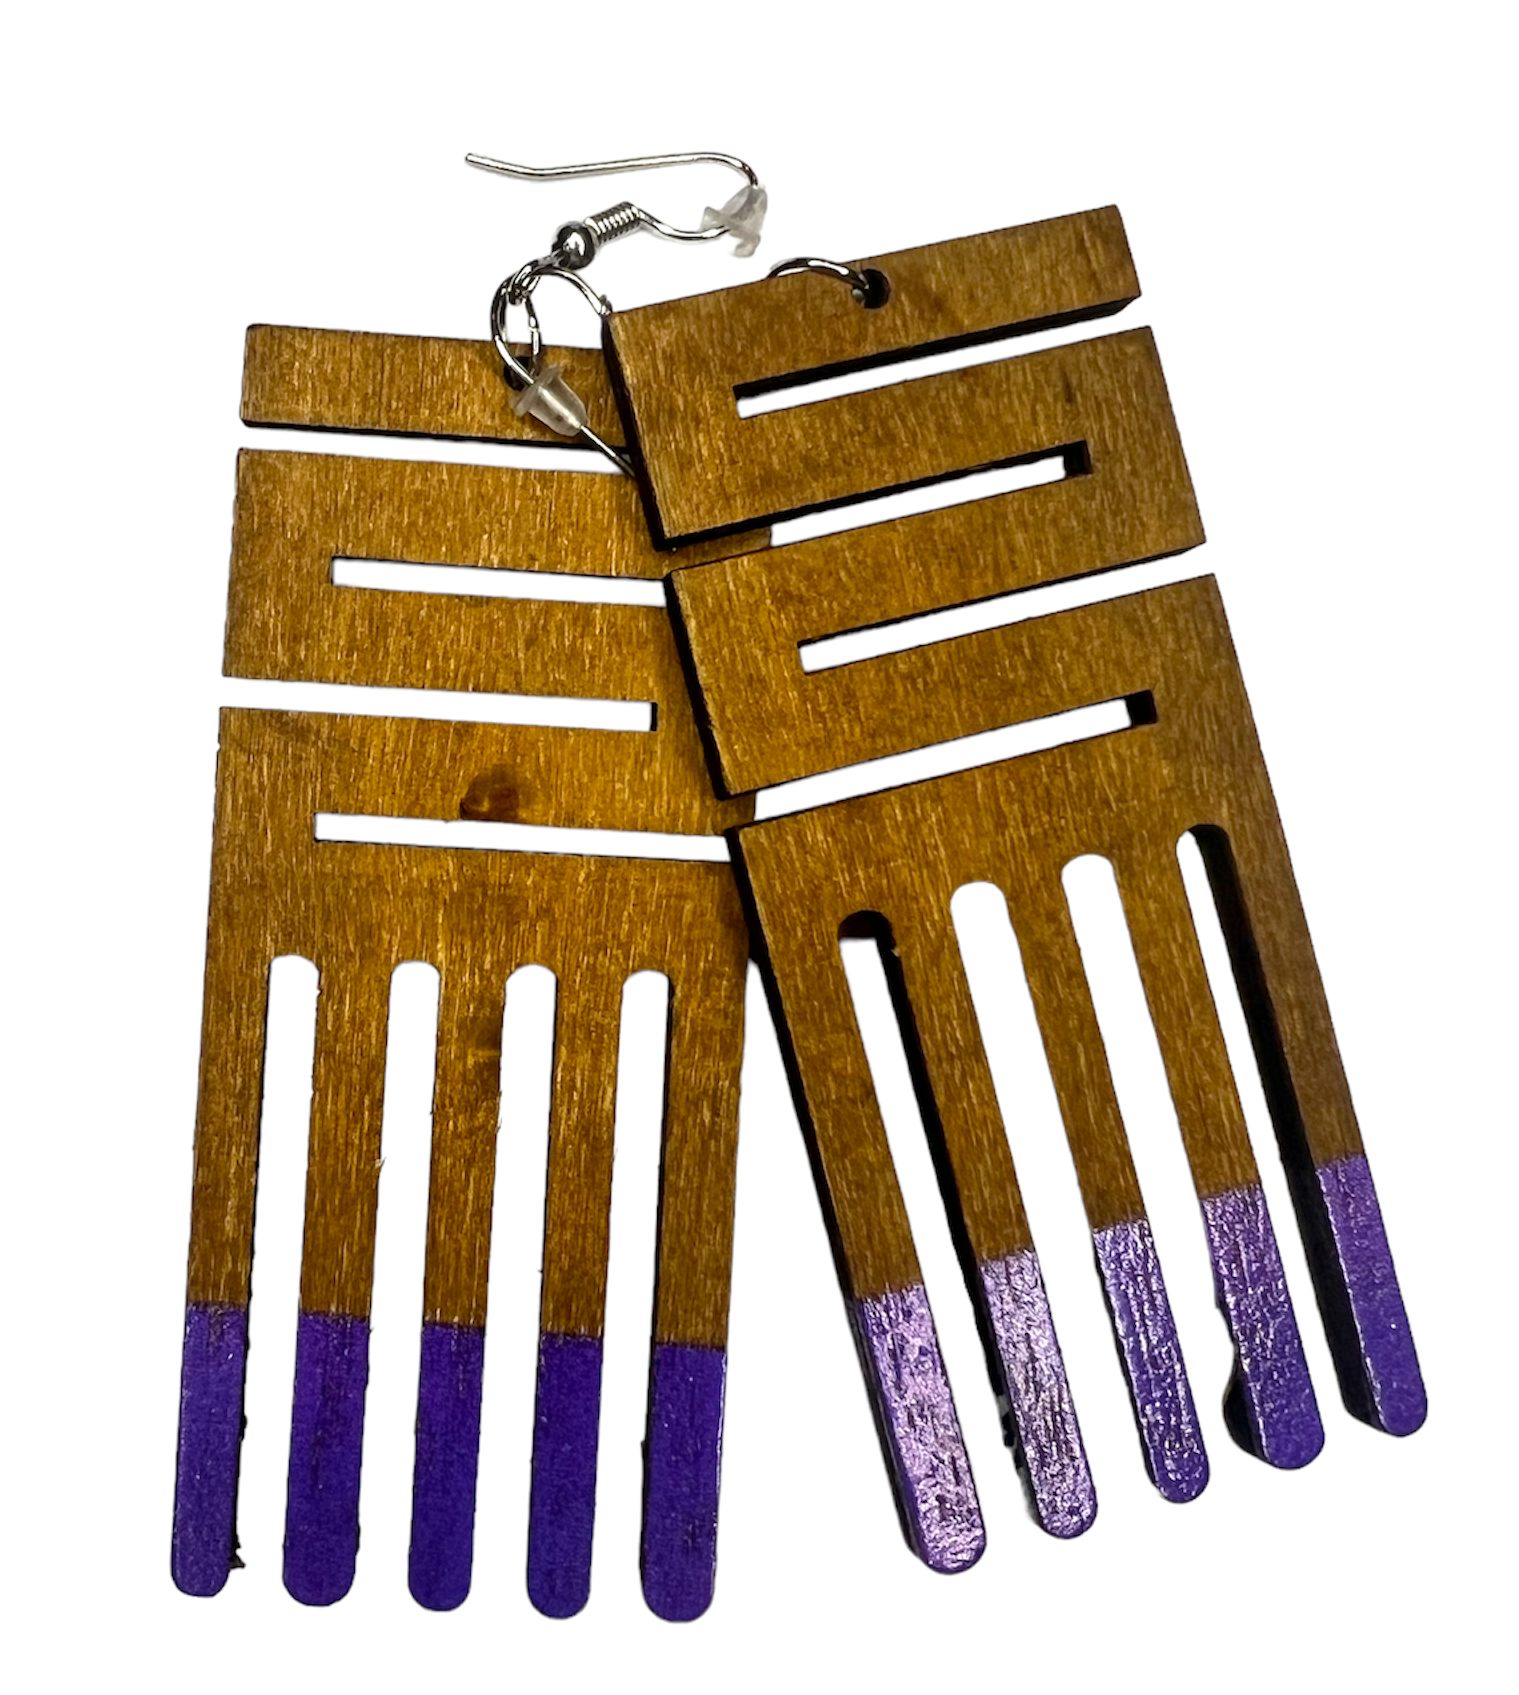 Natural wood dangling afro comb earring with maze-cut handle design and royal purple teeth